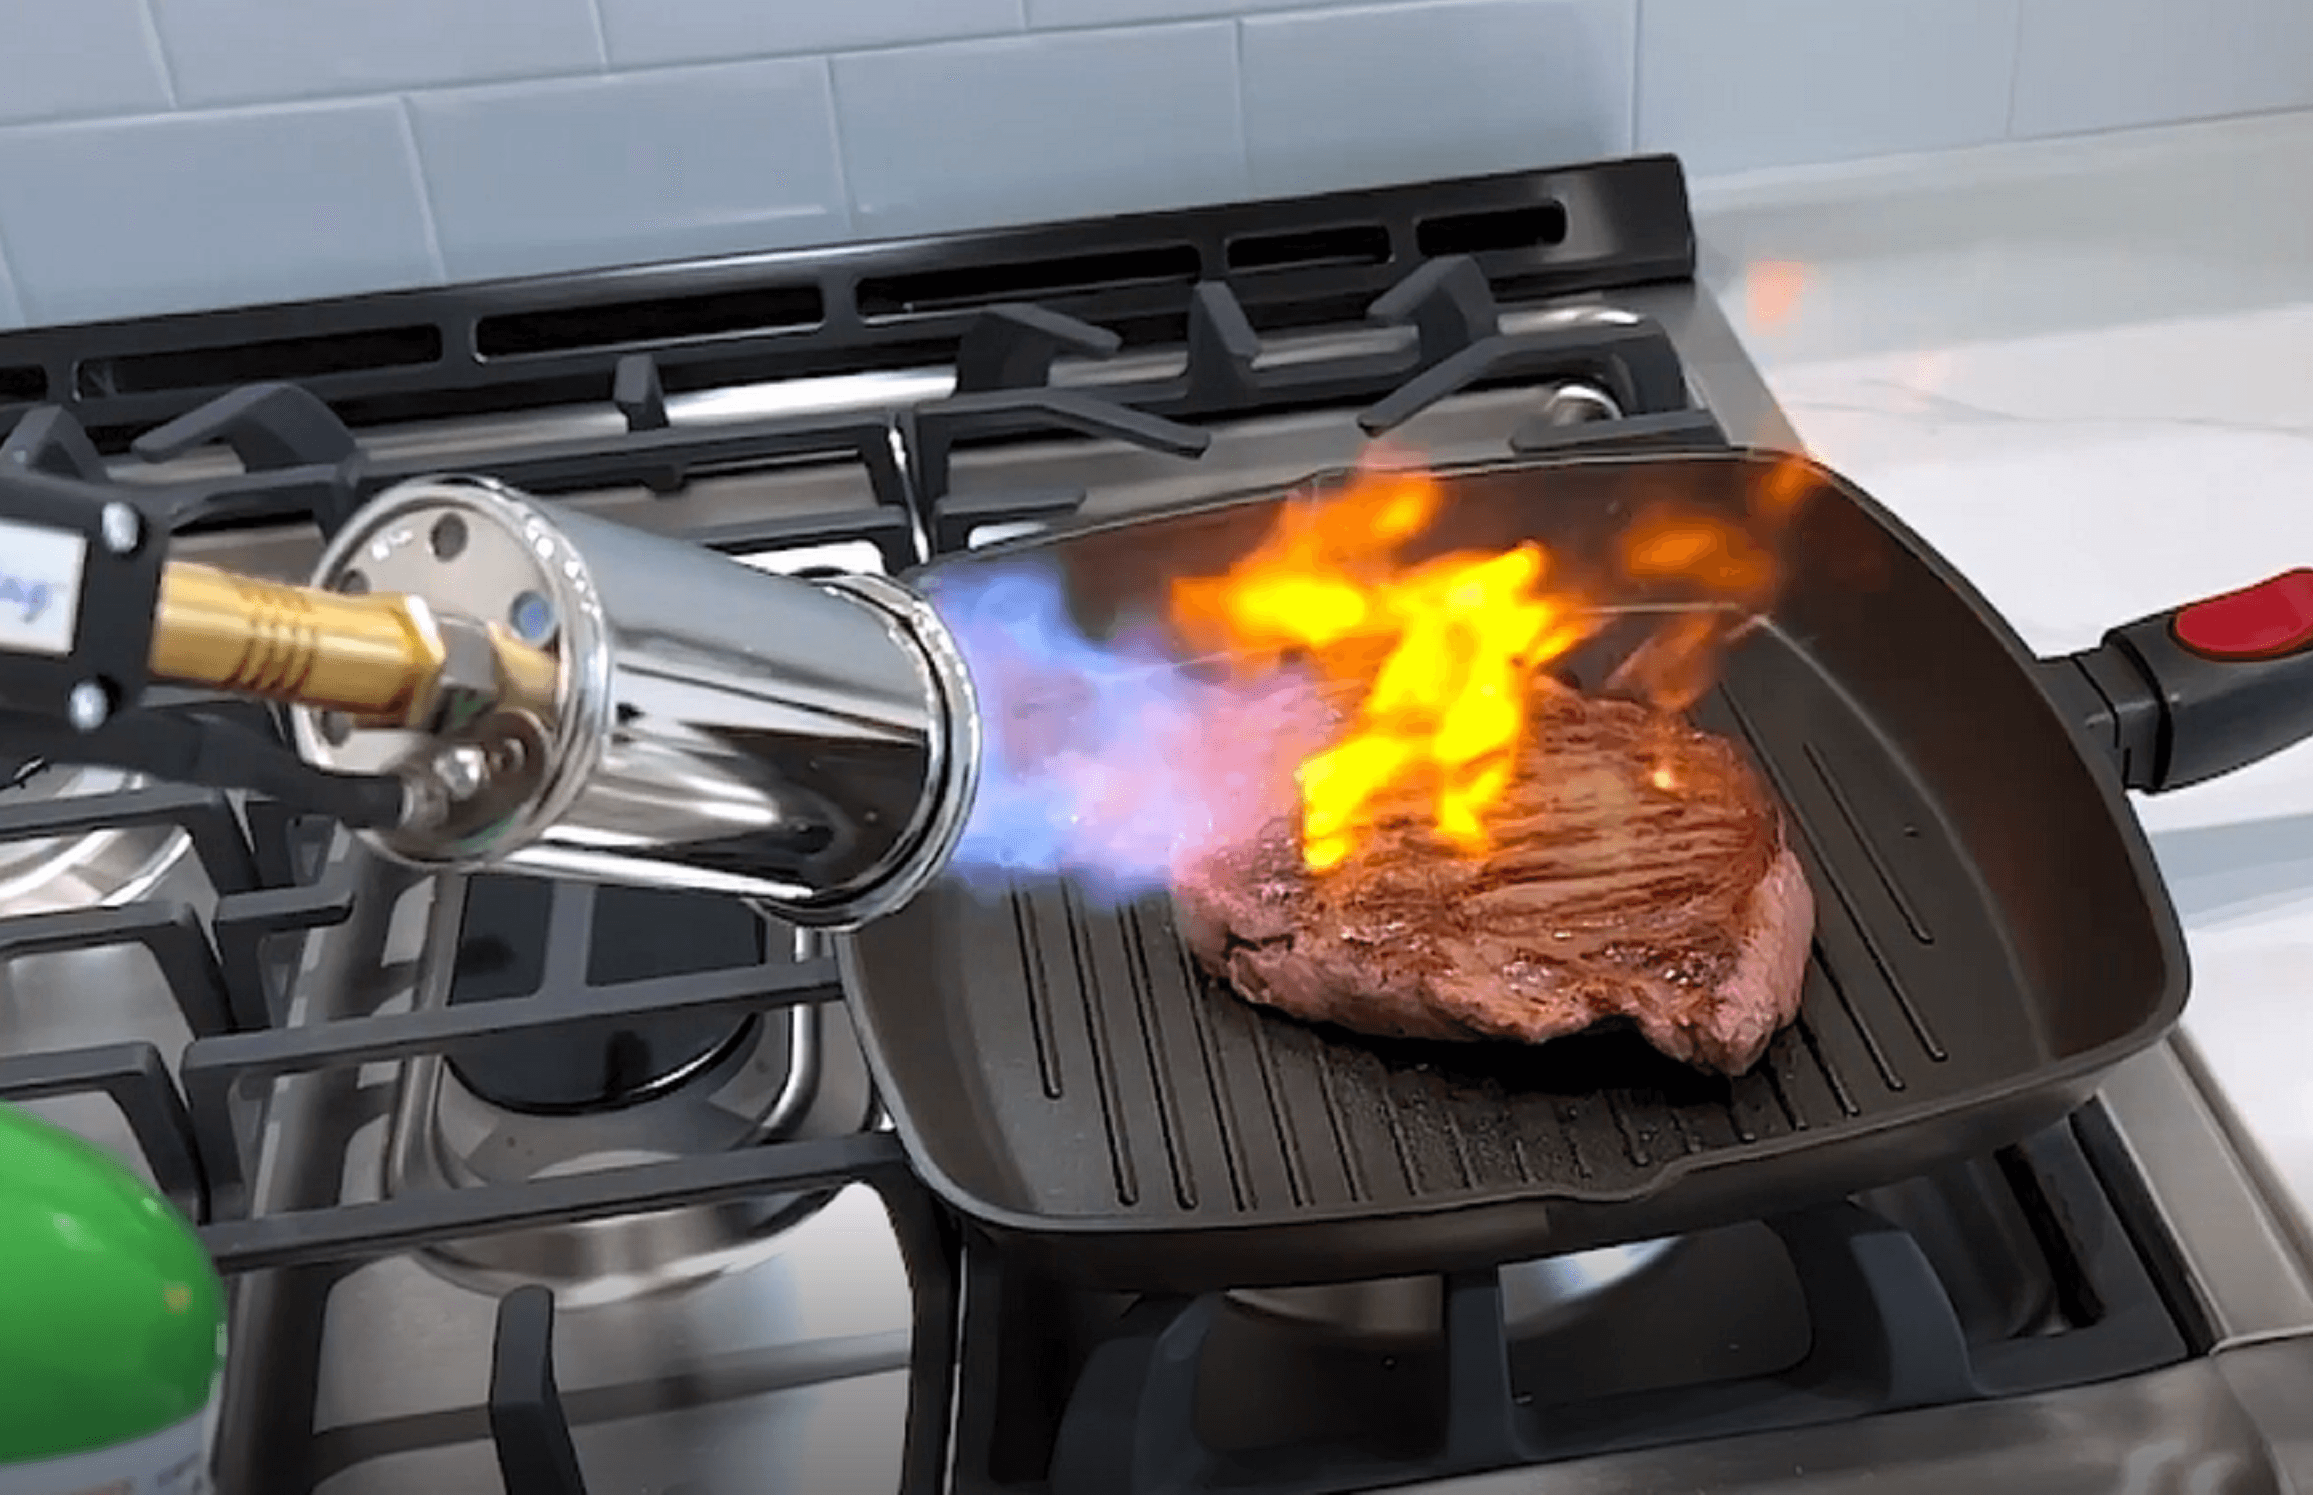  Propane Torch Gun, Powerful Flame Gun for Sous Vide, BBQ, and  More - Perfect Sear Torch for Searing Steak and Creme Brulee - Flamethrower  and grill torch - Campfire Starter and